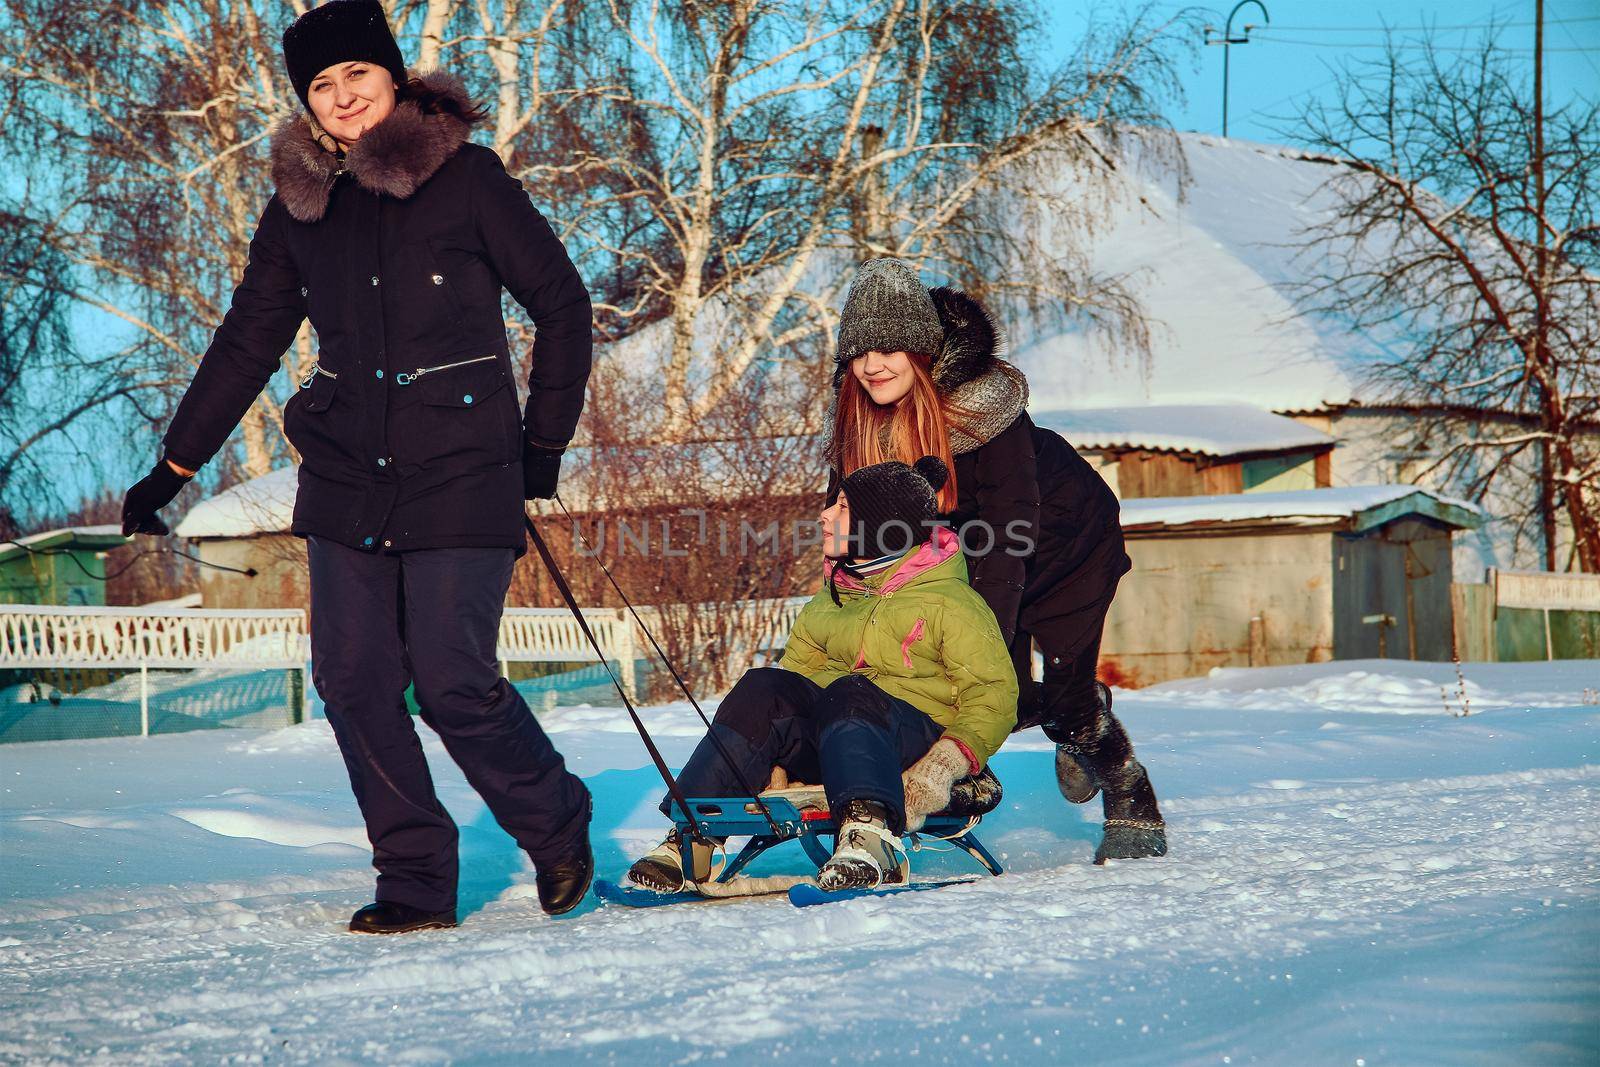 Village amusements in winter. Sledding in the rural hinterland. The family is relaxing in the open air.